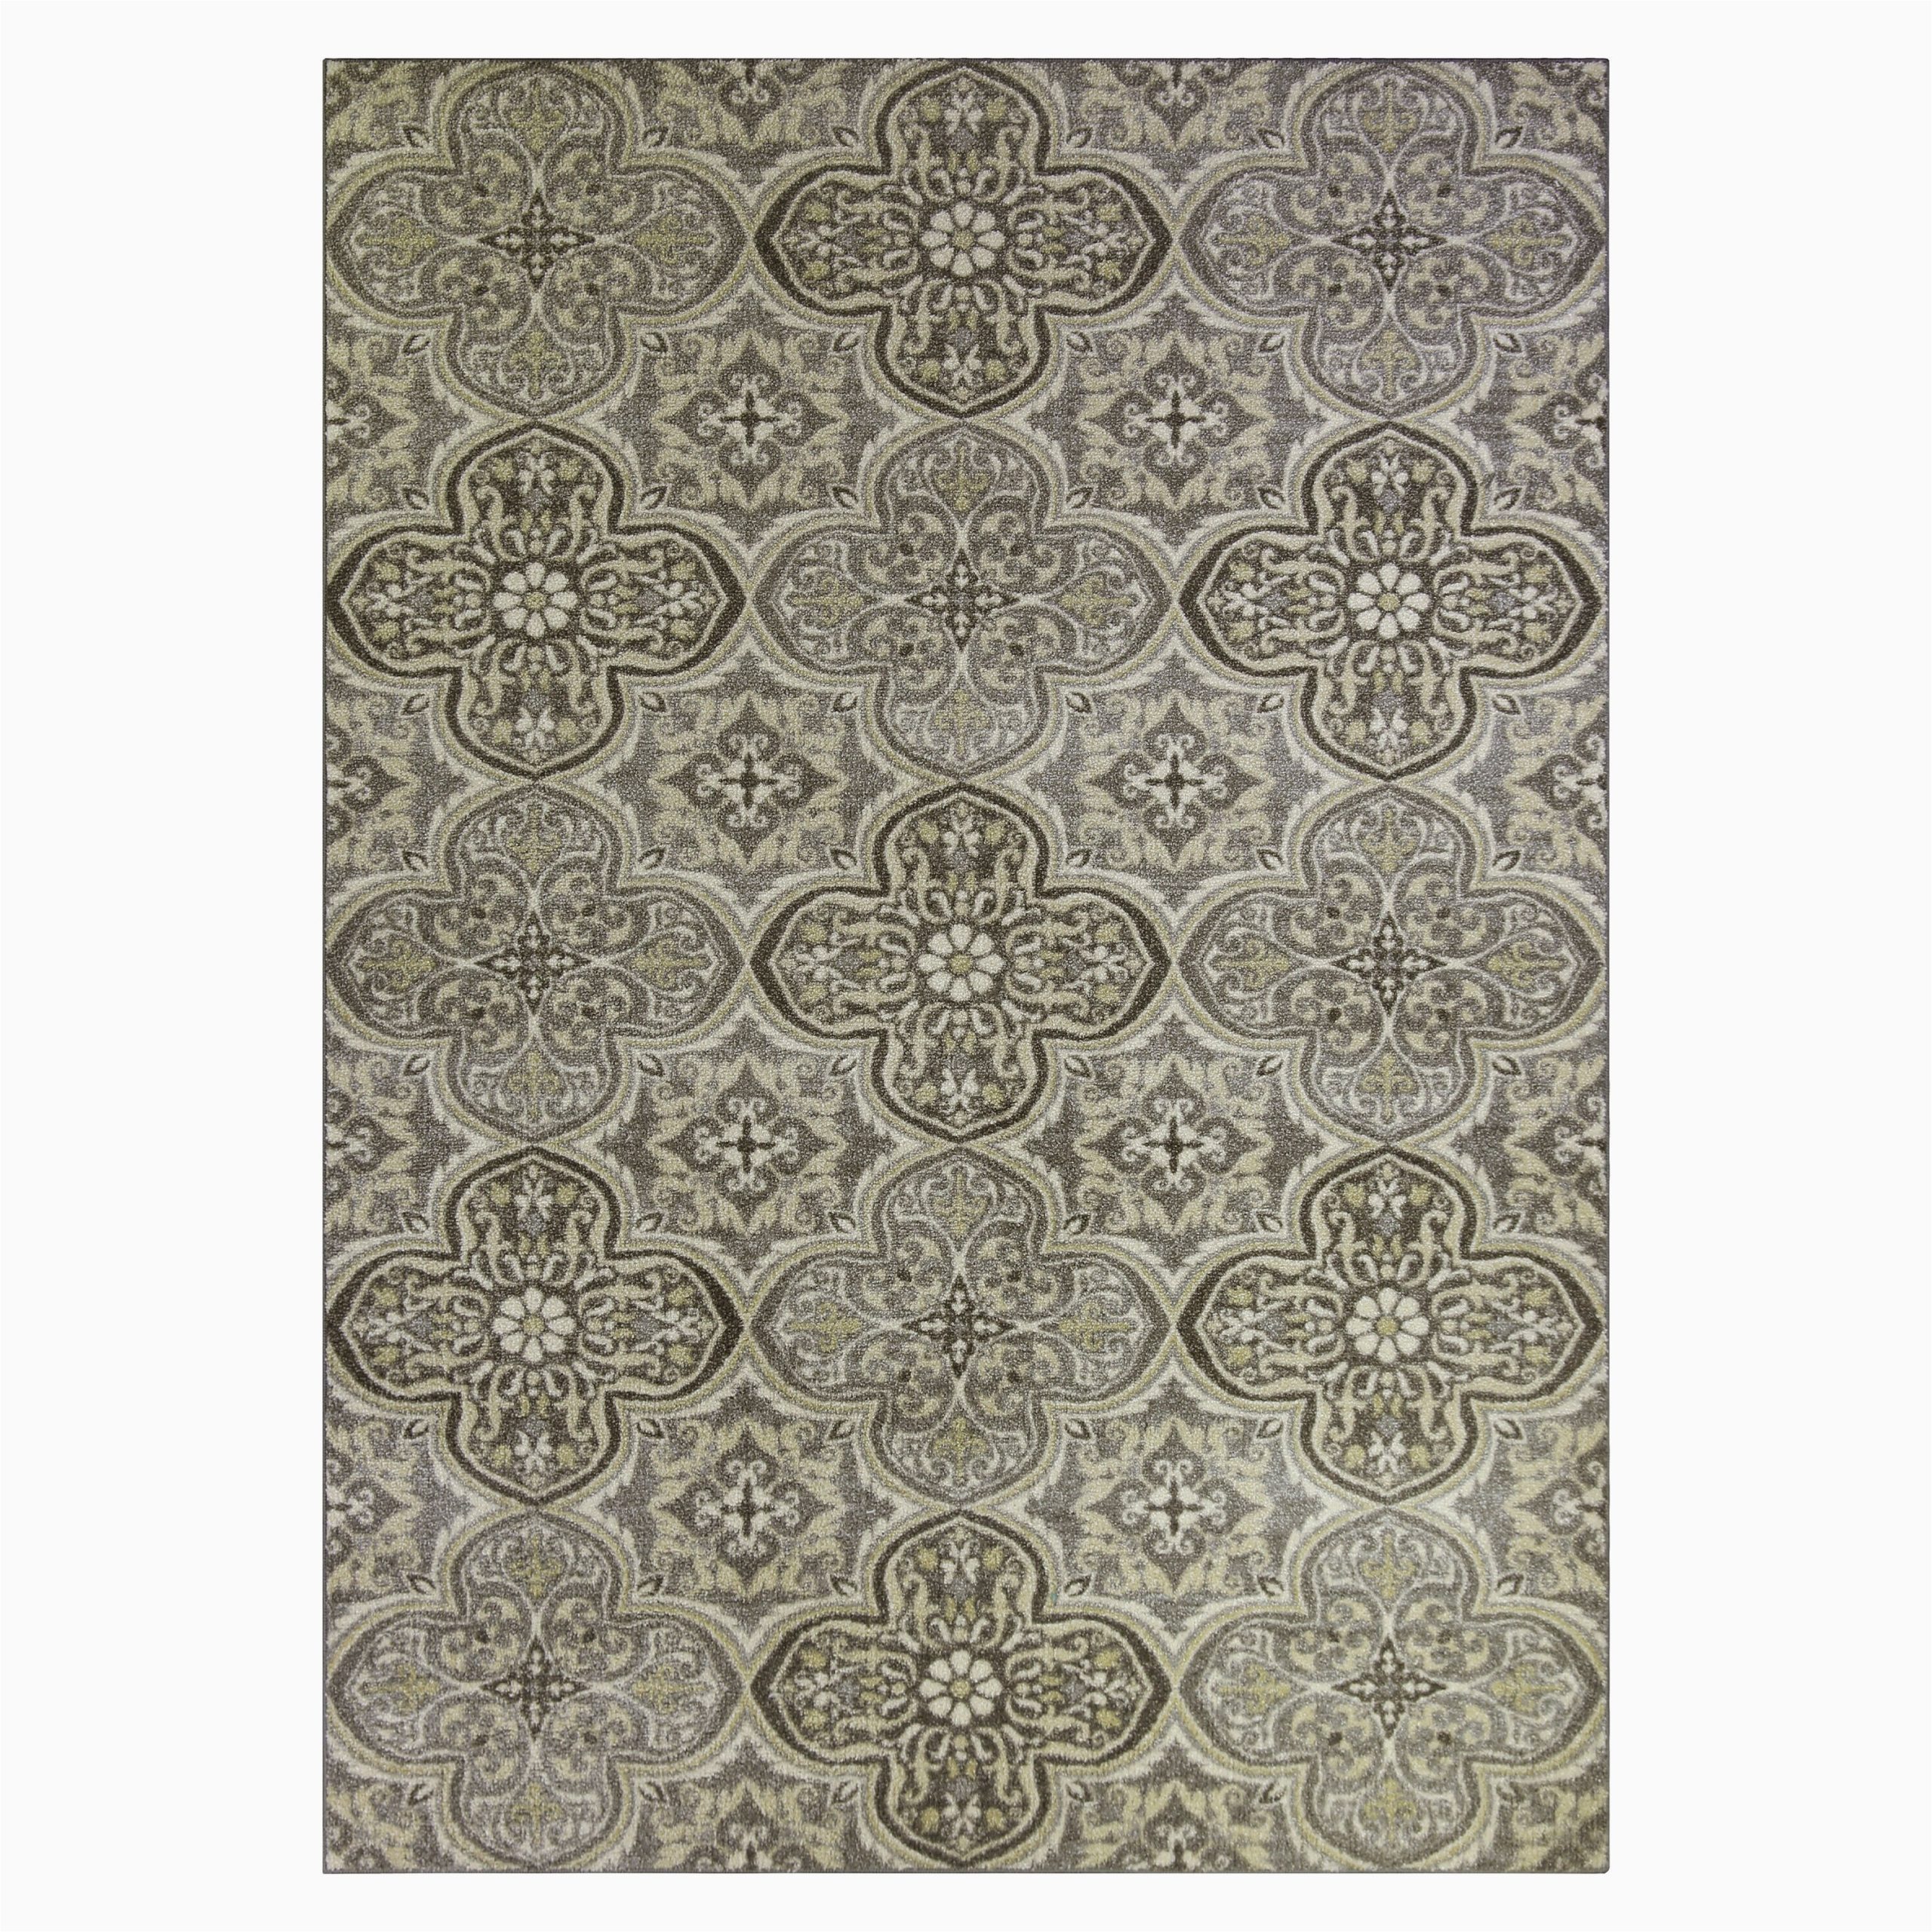 Maples Rugs Bed Bath and Beyond Maples Rugs 5 X 7 Gray/gold Indoor Trellis area Rug In the Rugs …